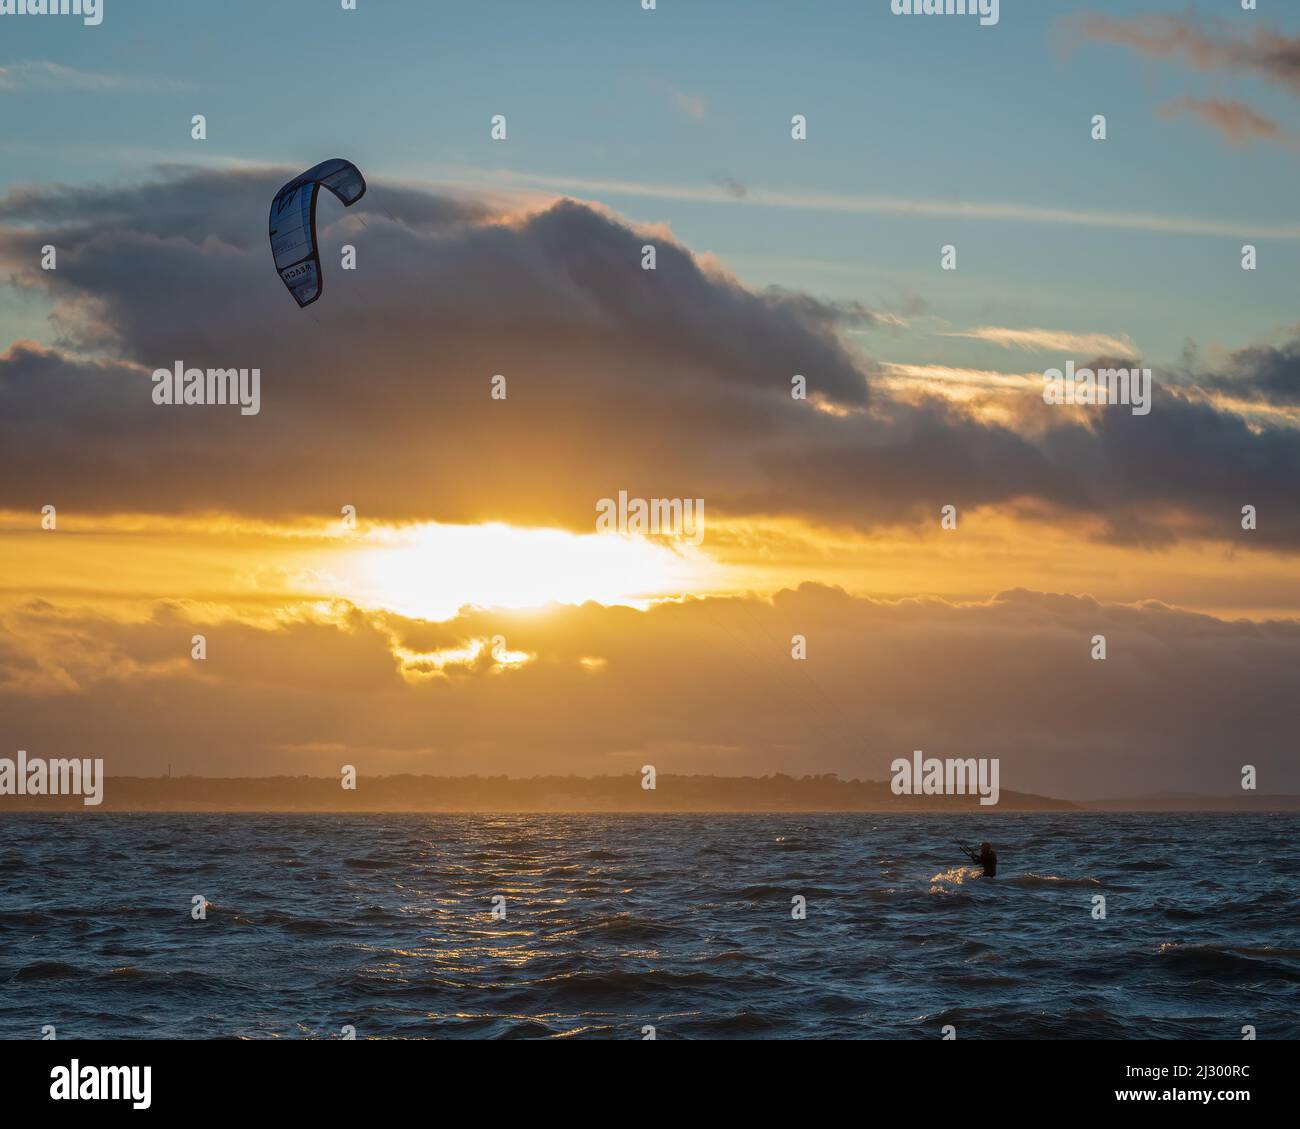 Kite surfers making the most of a windy day on the Solent, just of the beach in Stokes Bay, Gosport, Hampshire, England, UK. Stock Photo